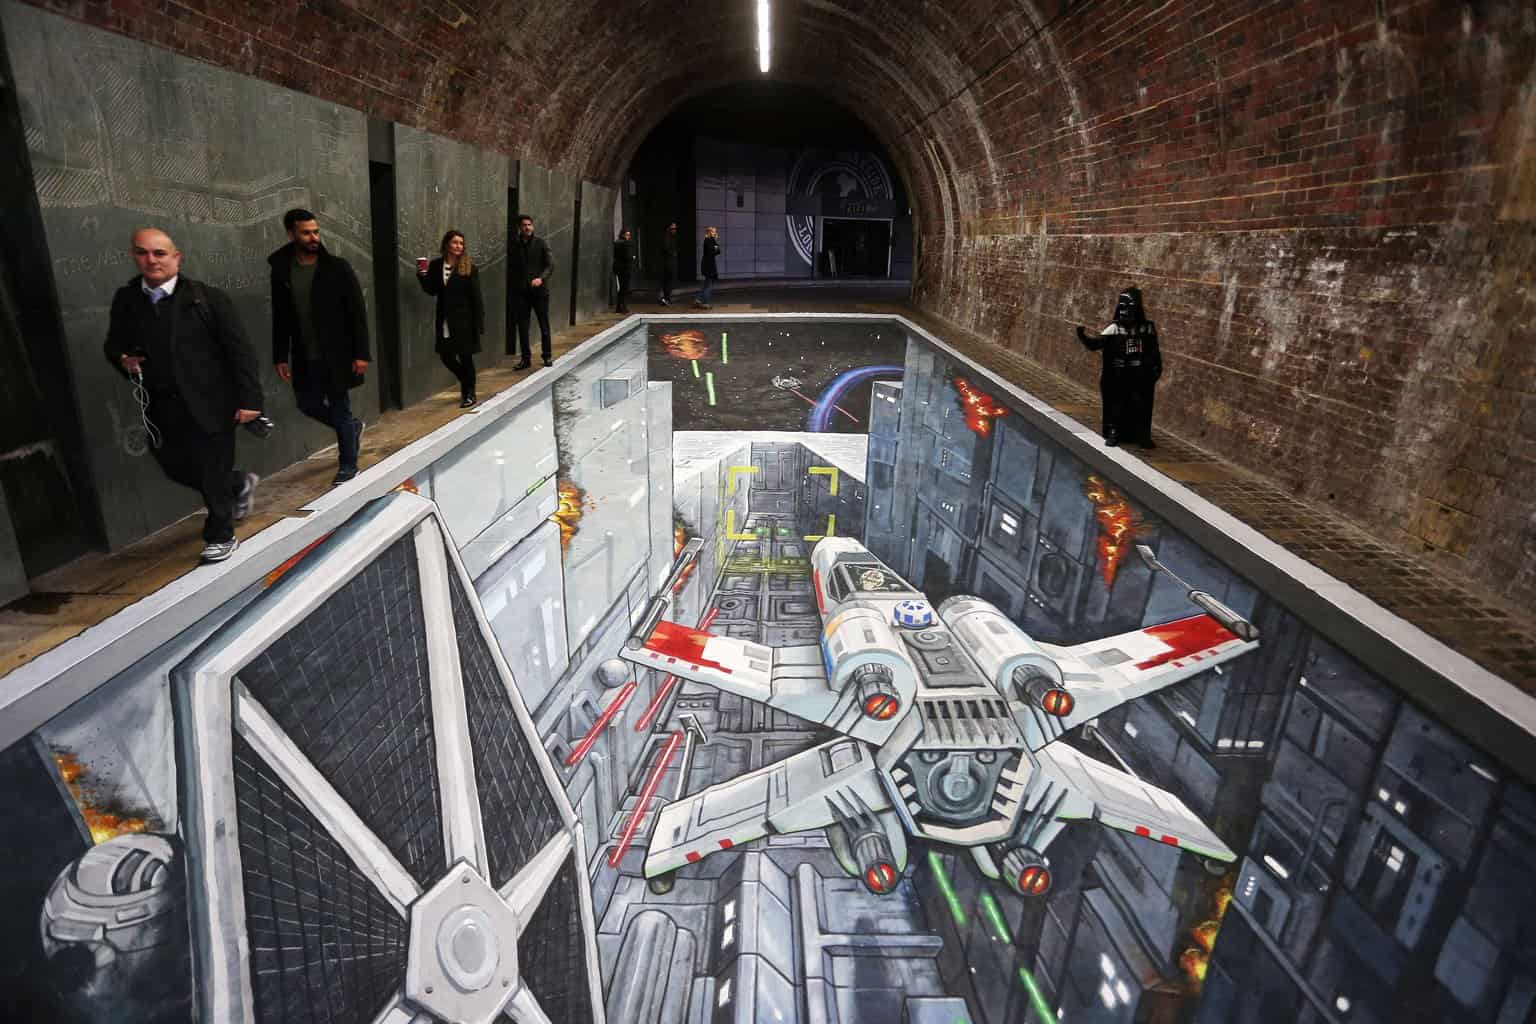 COMMUTERS TRANSPORTED INTO EPIC DEATH STAR TRENCH RUN